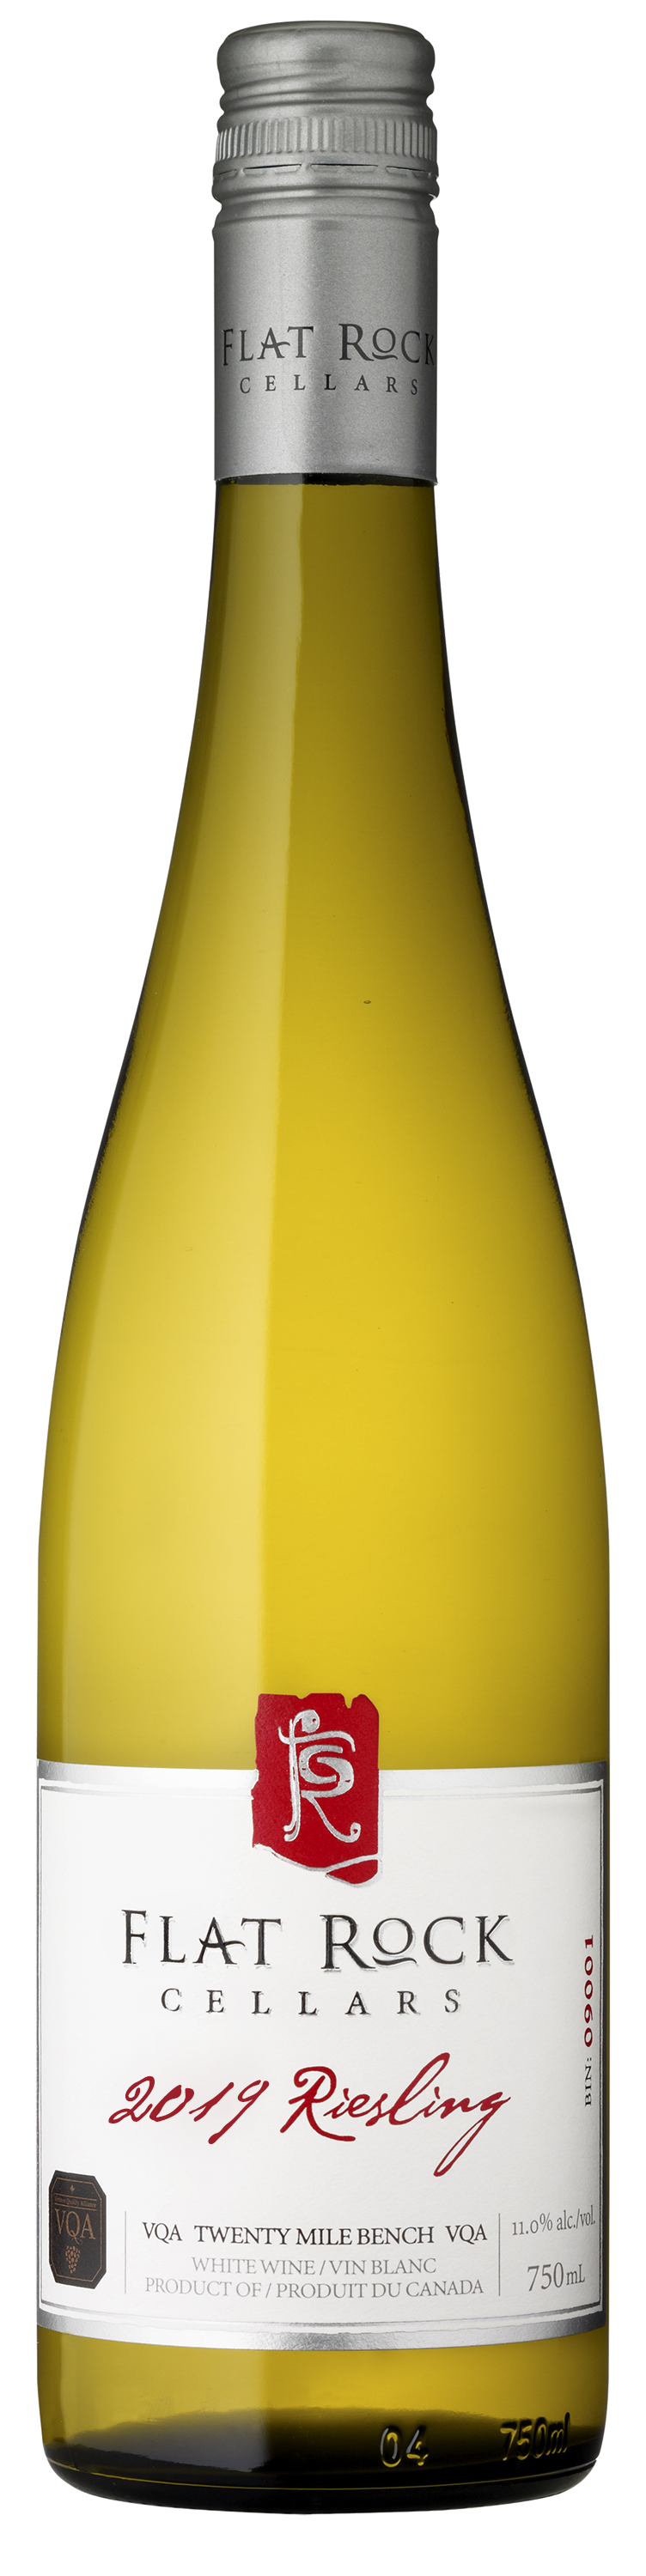 Product Image for 2019 Riesling